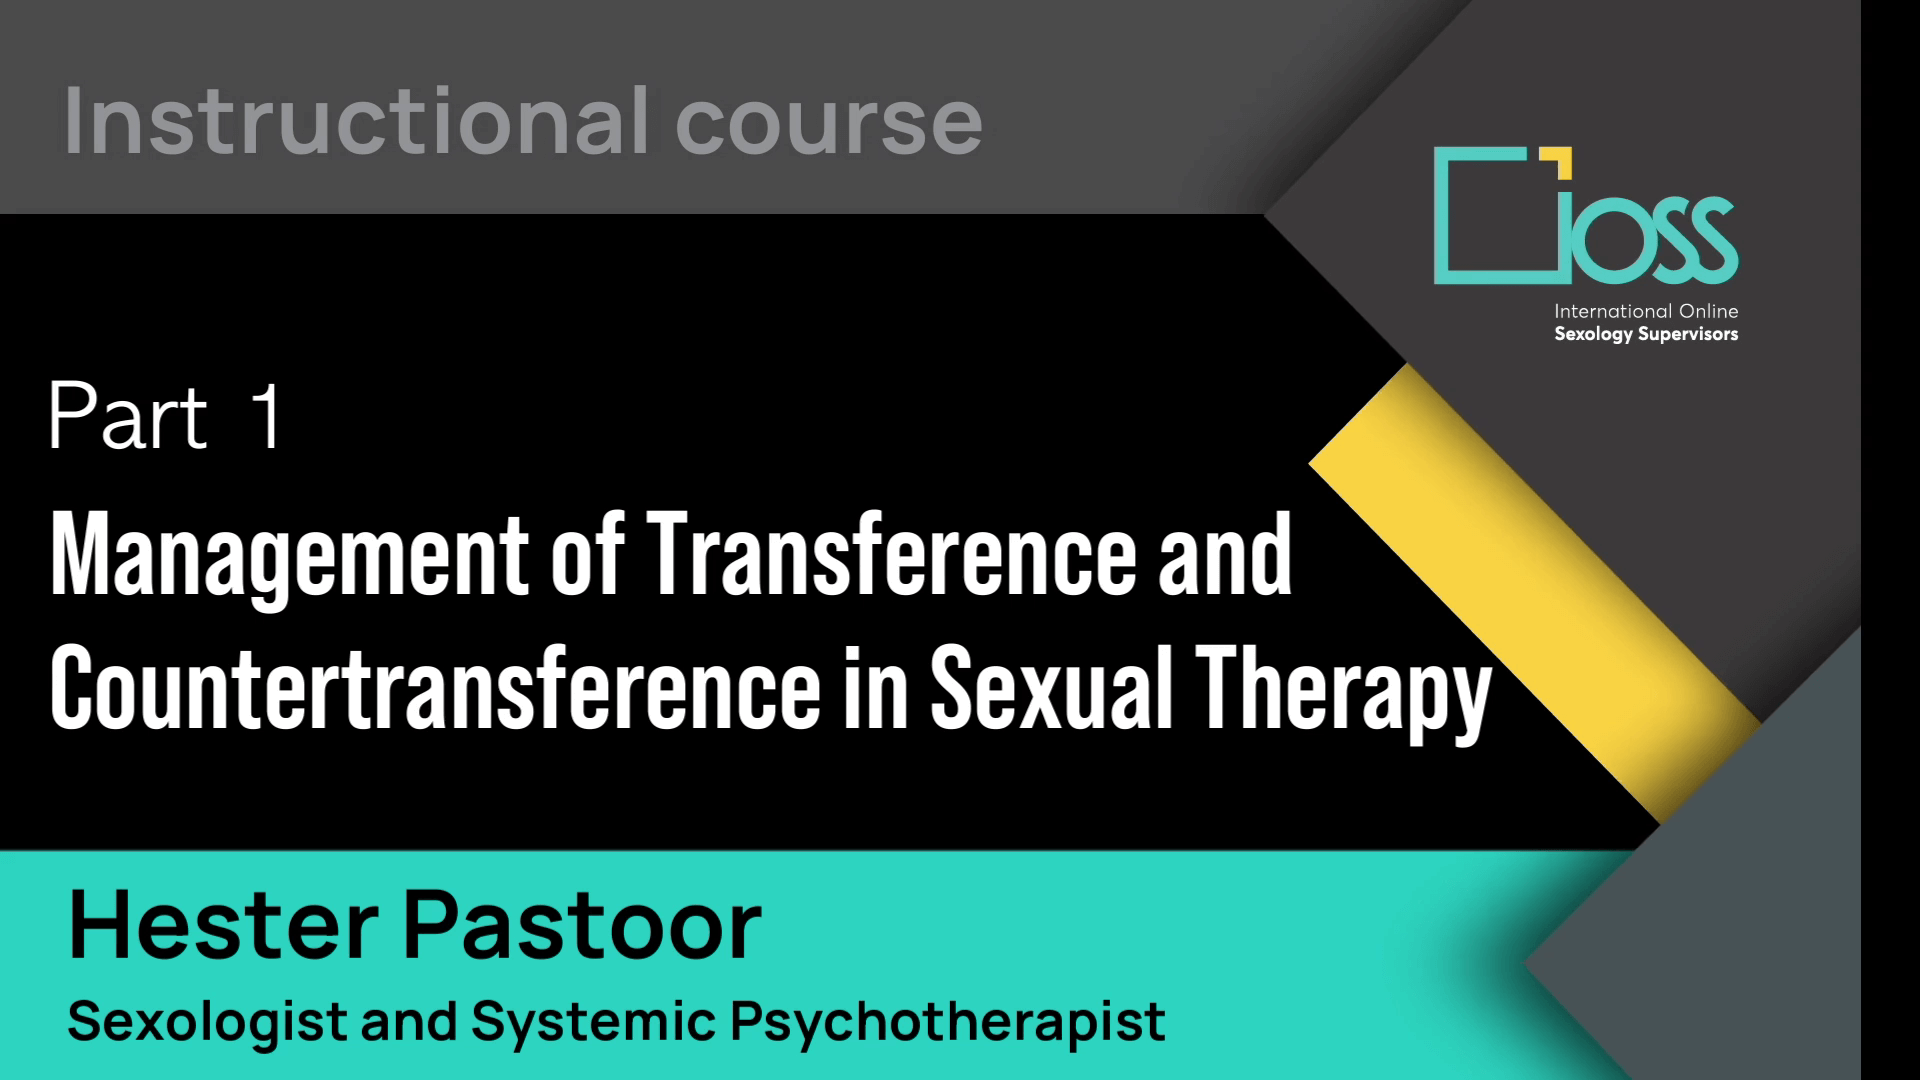 Part 1 Management of transference and countertransference in sexual therapy (Part 1 & 2)